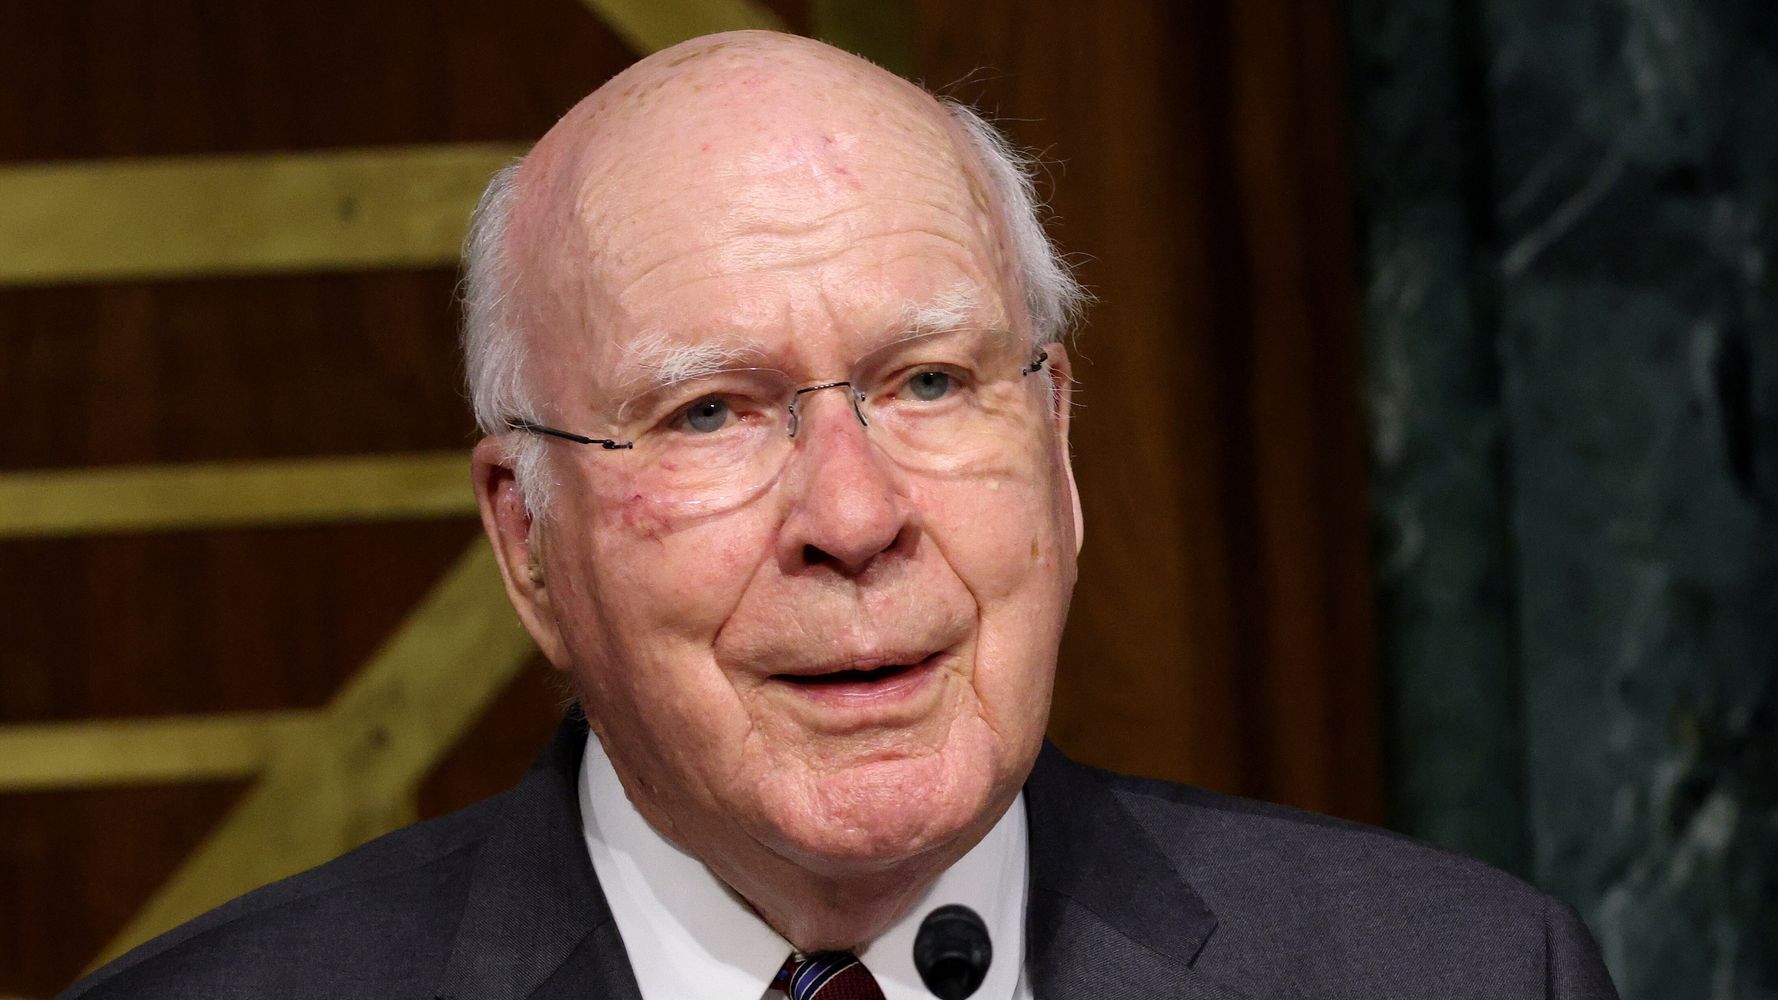 Patrick Leahy Calls For Leonard Peltier's Release From Prison